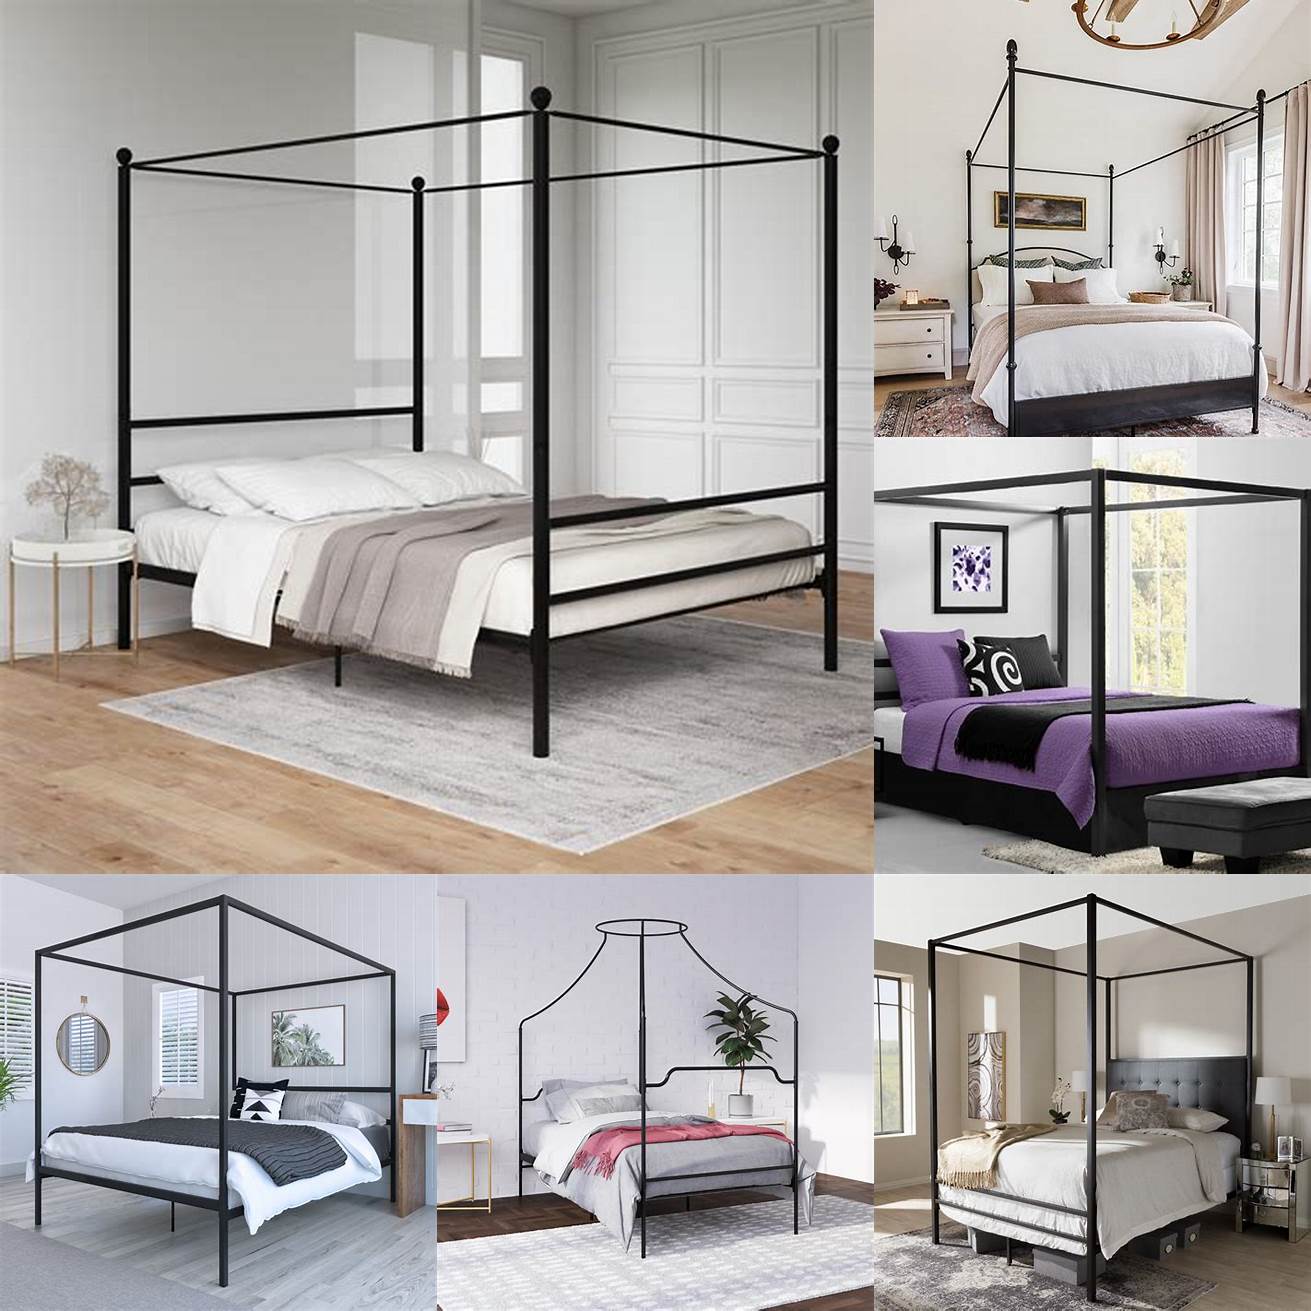 Modern metal canopy bed with black bedding